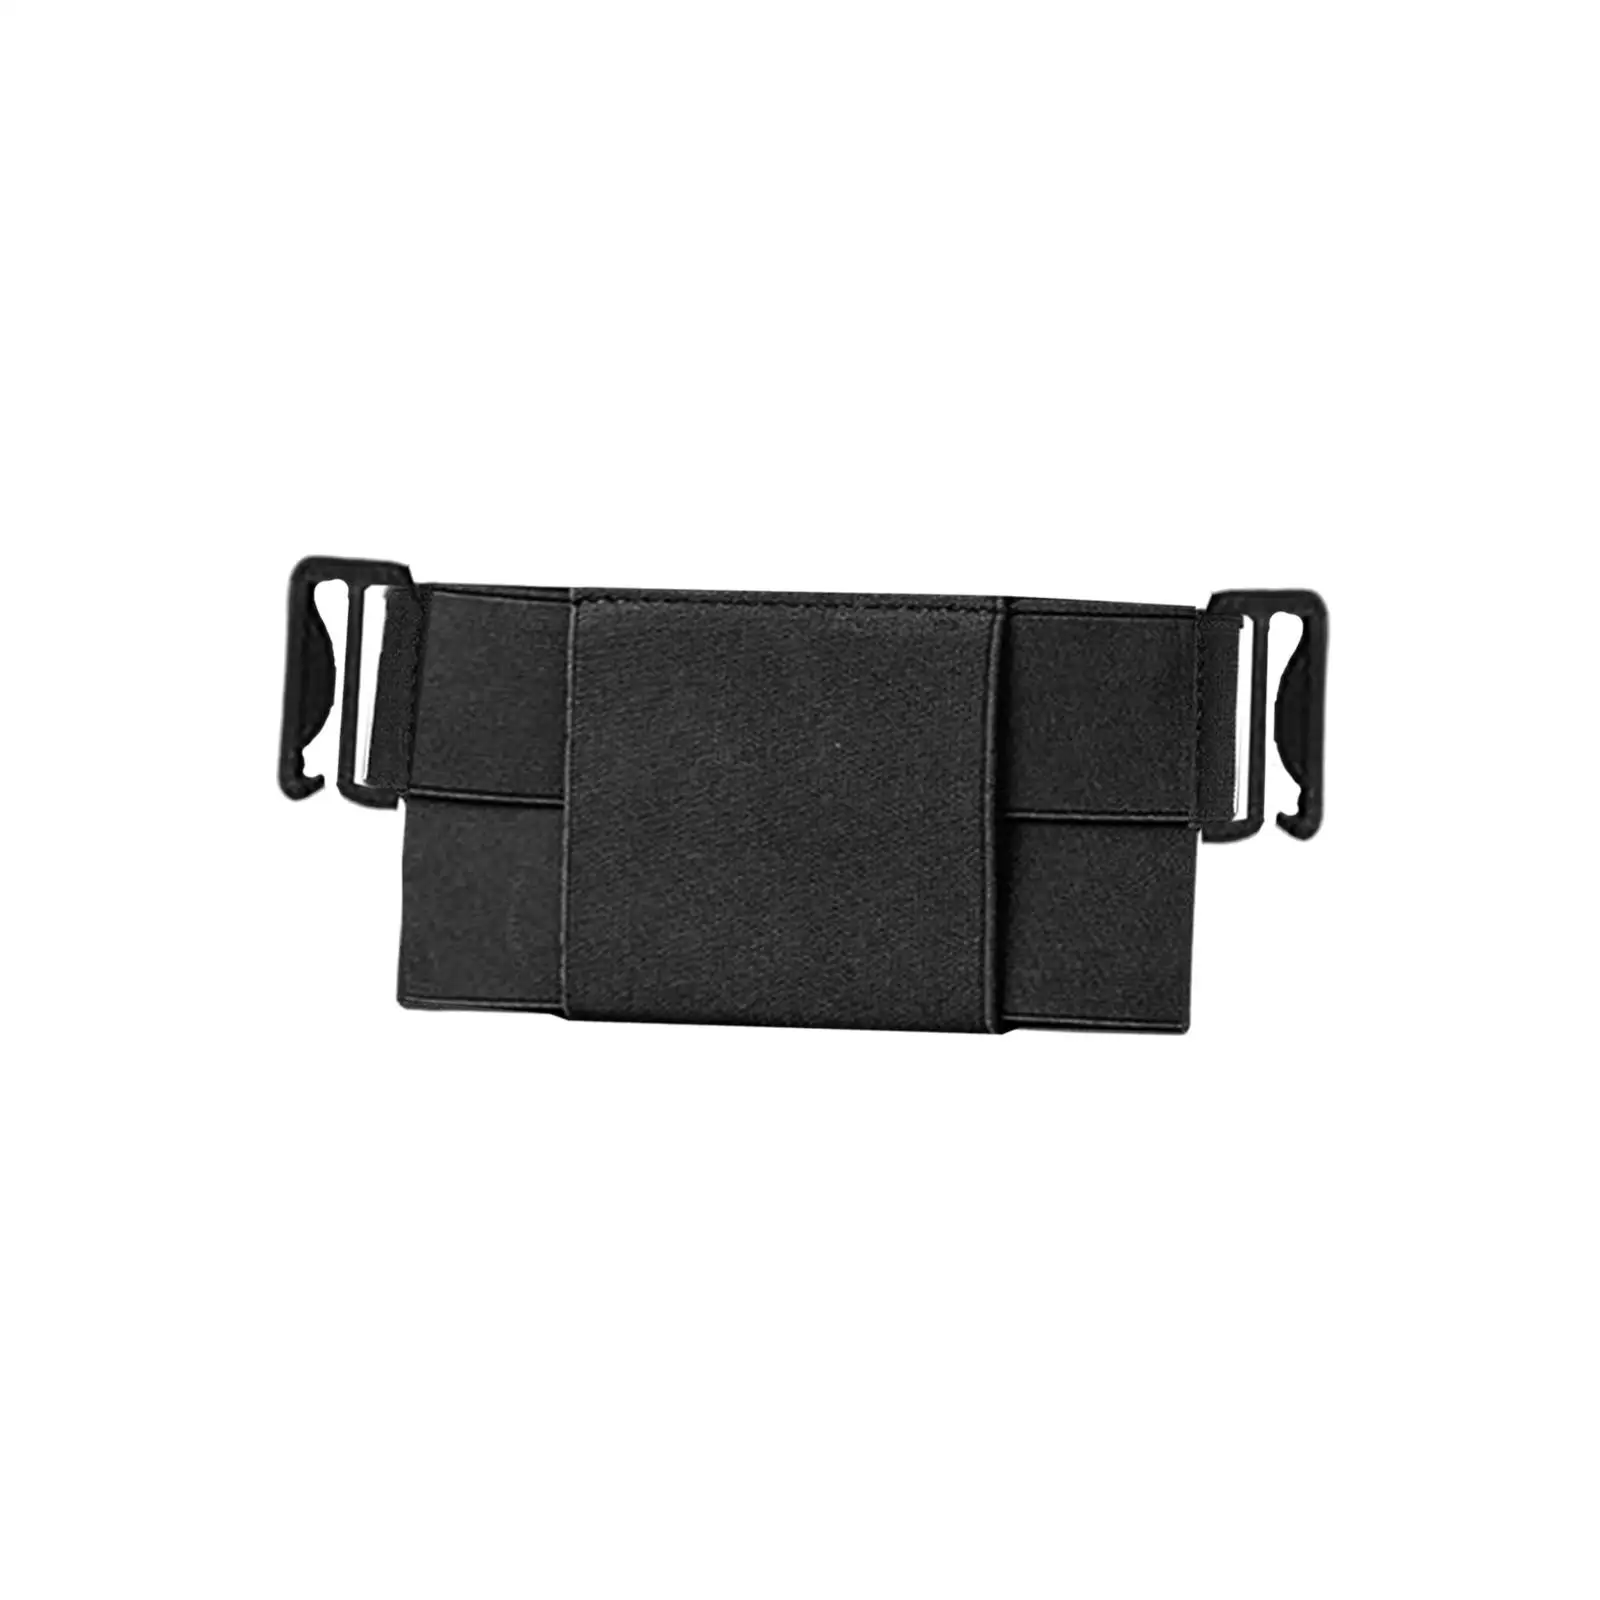 Invisible Wallet Waist Bag Universal Compact Card Storage Bag for Men Women